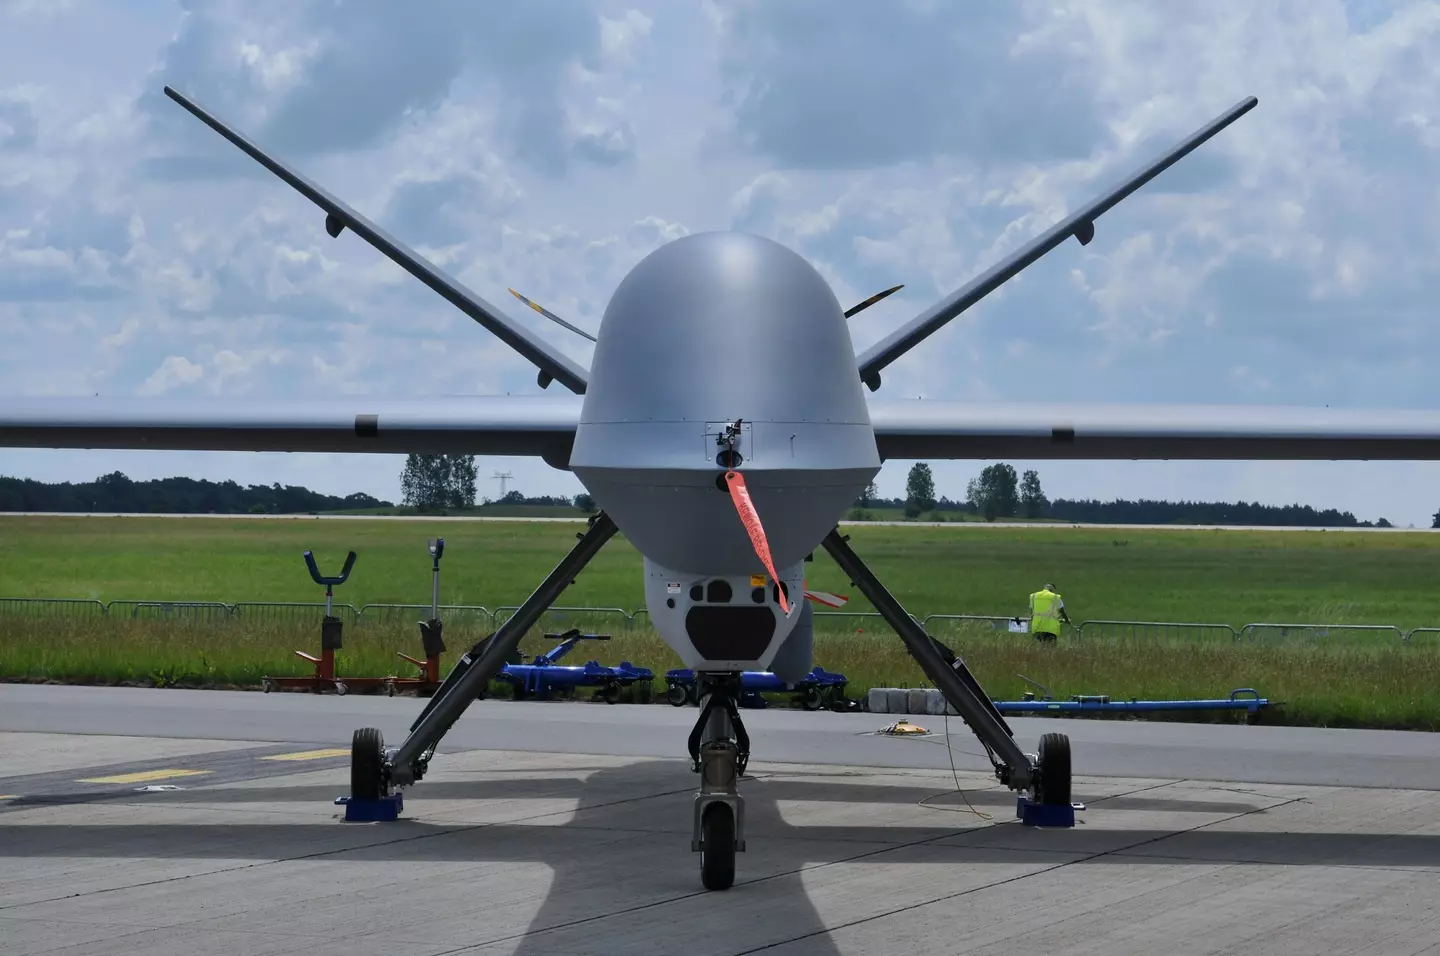 A USAF Colonel said they put a drone with AI through a simulation where it killed the human operator, but later said it was a 'thought experiment'.